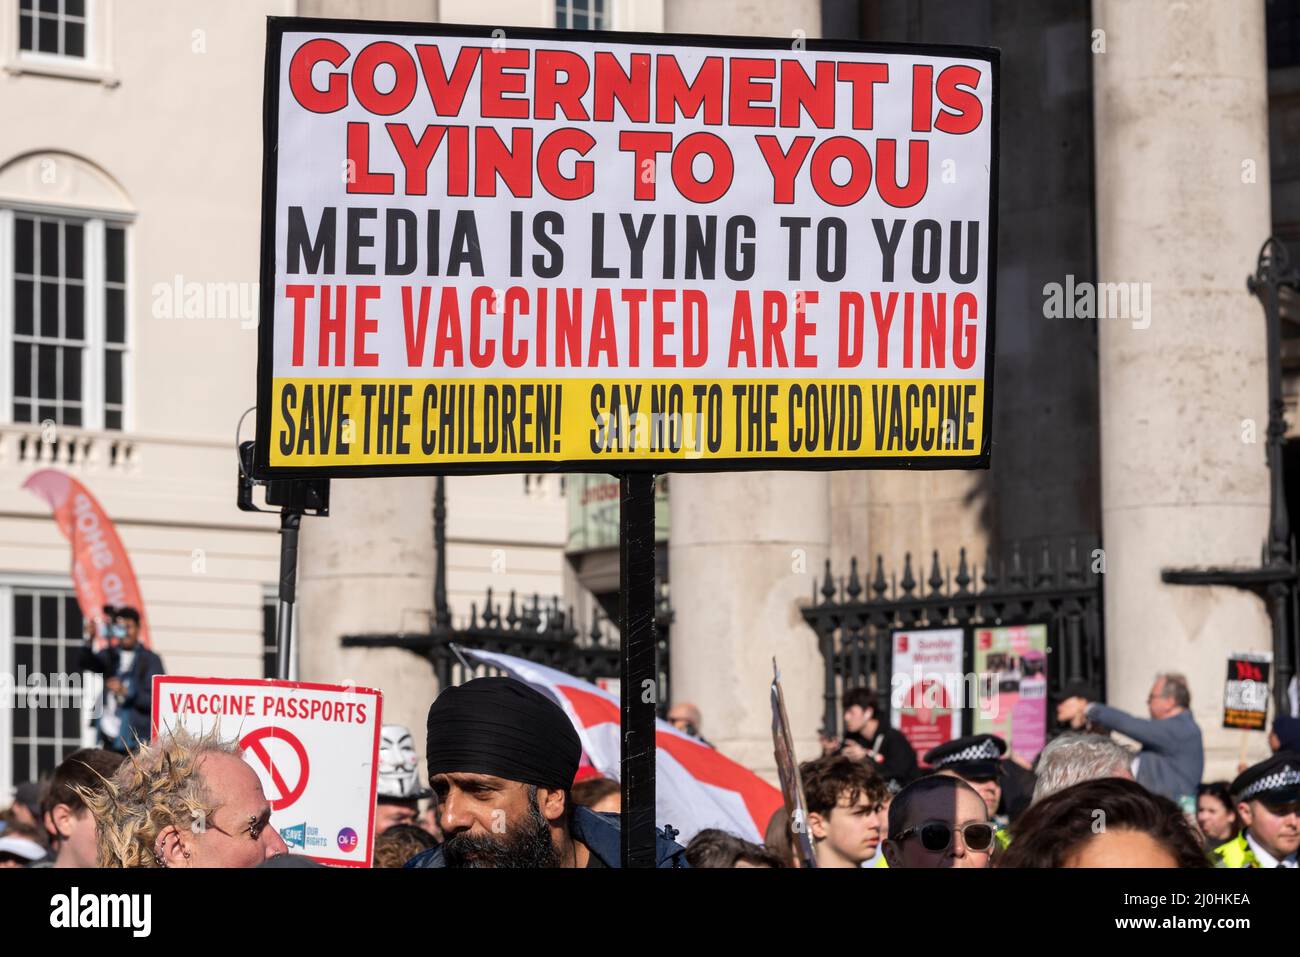 Westminster, London, UK. 19th Mar, 2022.A protest is taking place against vaccinating children for Covid 19, joined by anti-vaxxers. Placard stating government is lying, media is lying, vaccinated are dying Stock Photo